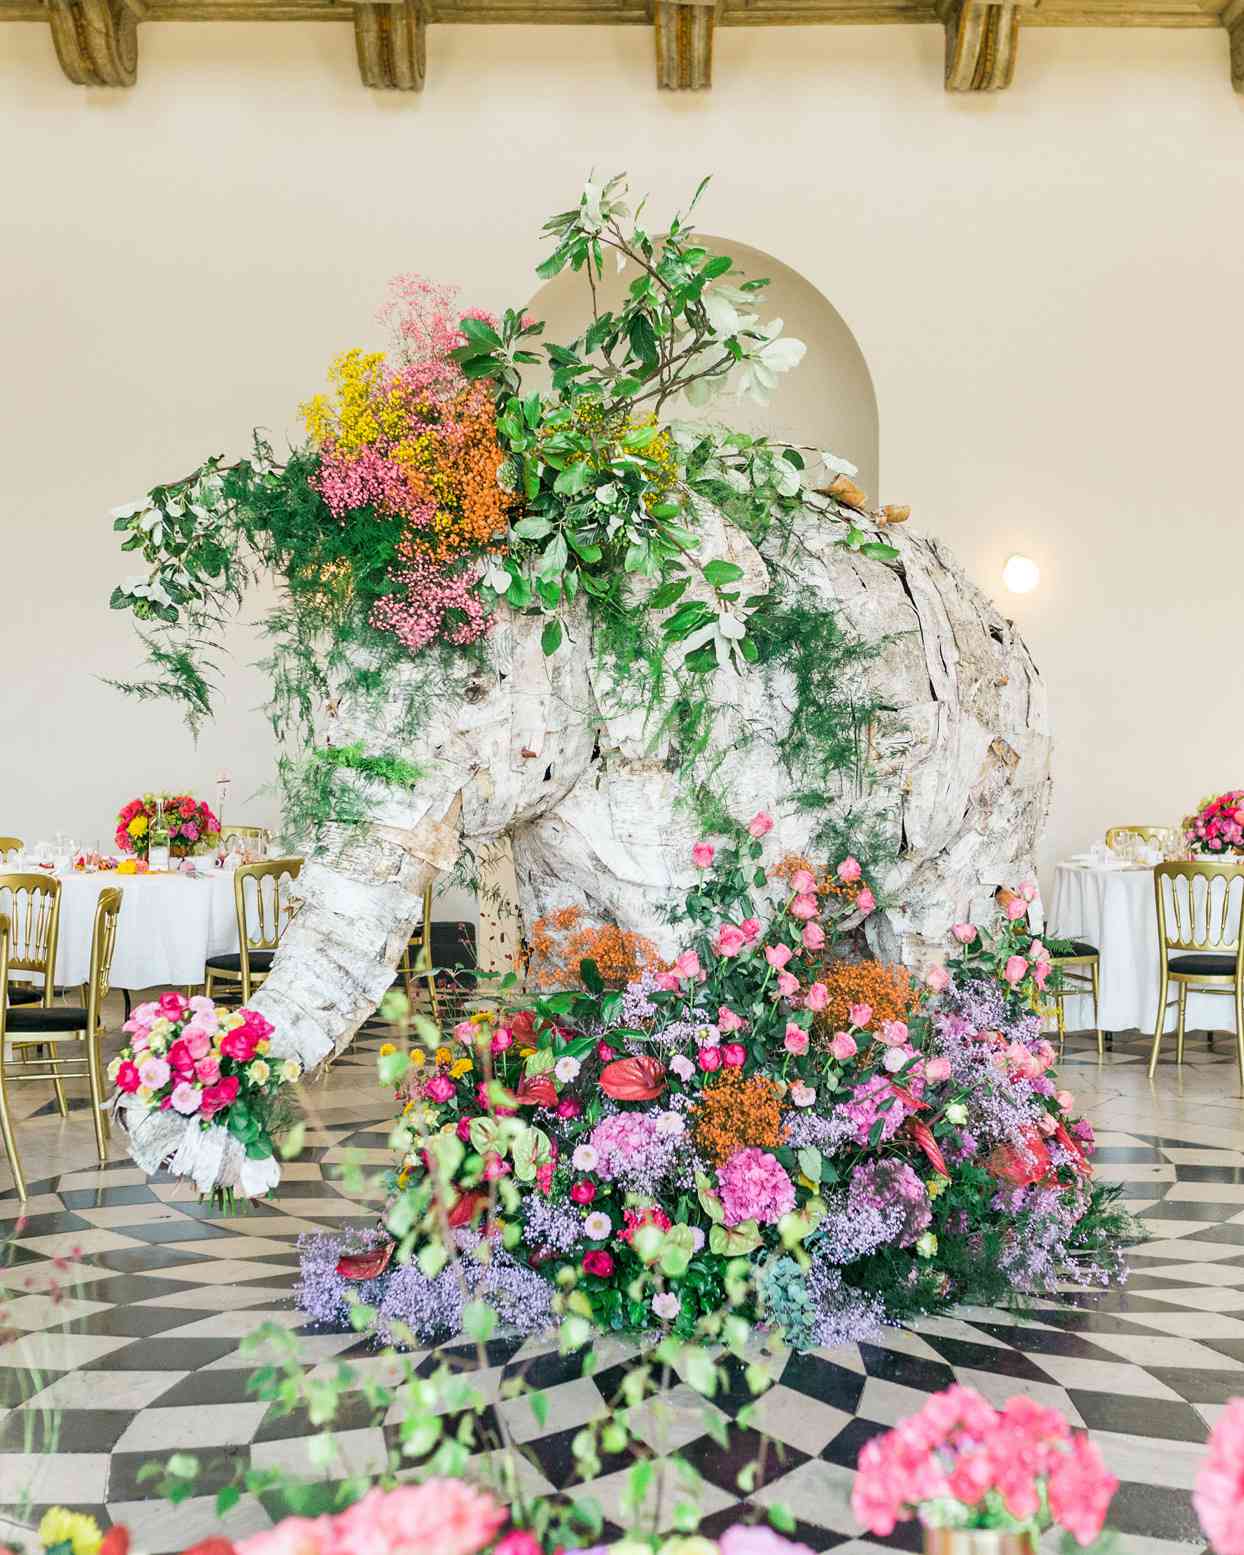 life sized asian elephant centerpiece decorated with floral display